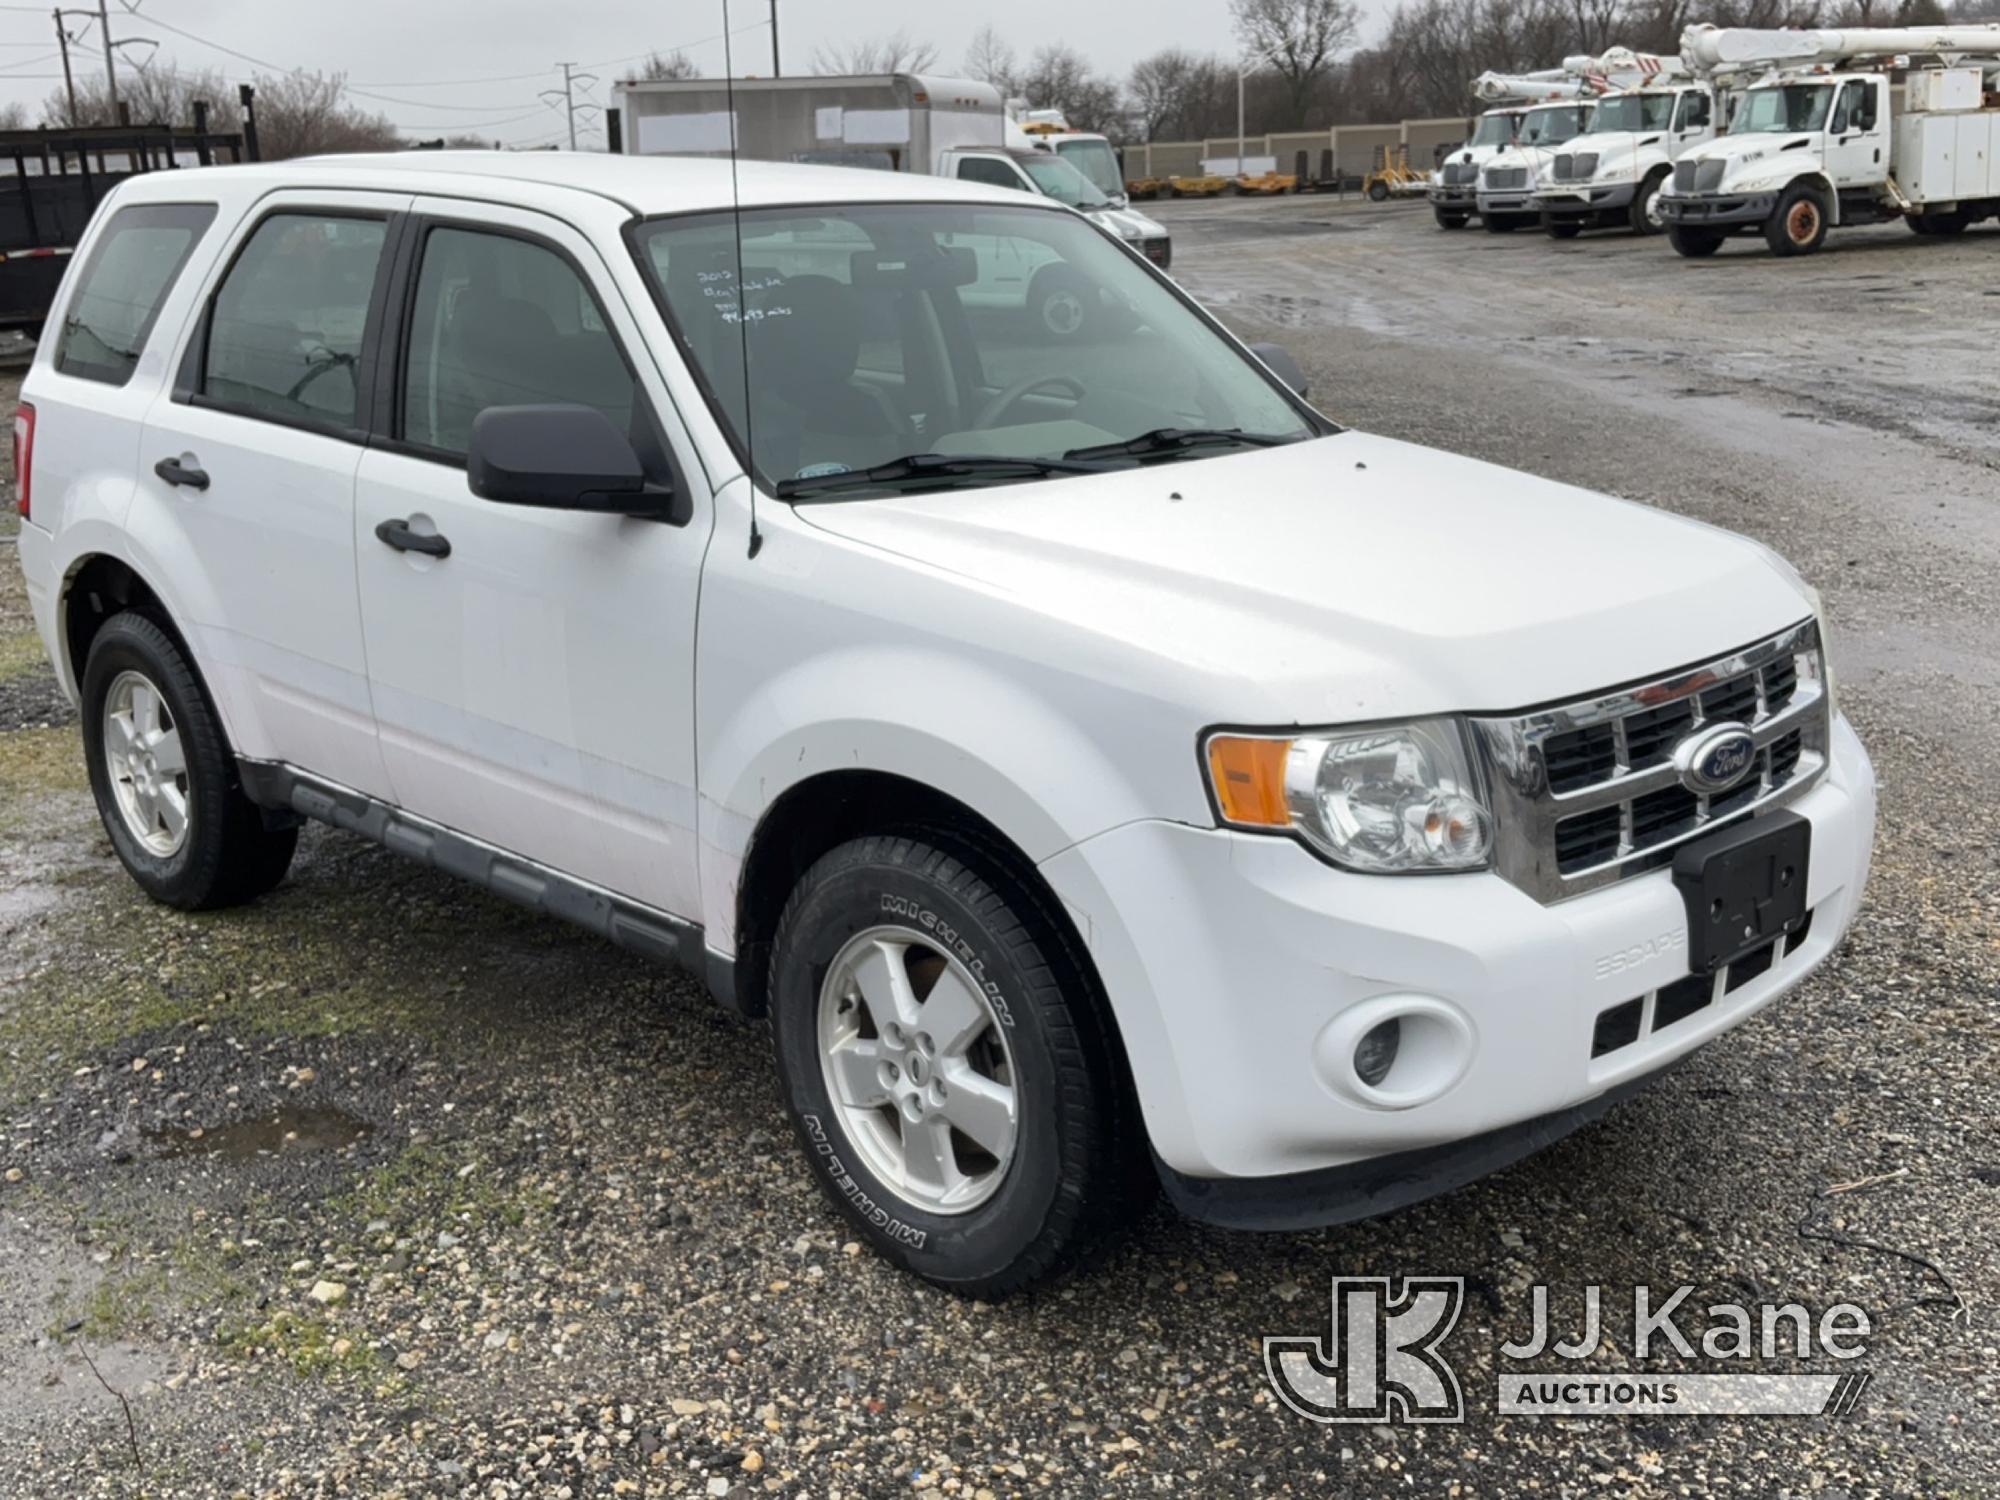 (Plymouth Meeting, PA) 2012 Ford Escape 4x4 4-Door Sport Utility Vehicle Runs & Moves, Body & Rust D